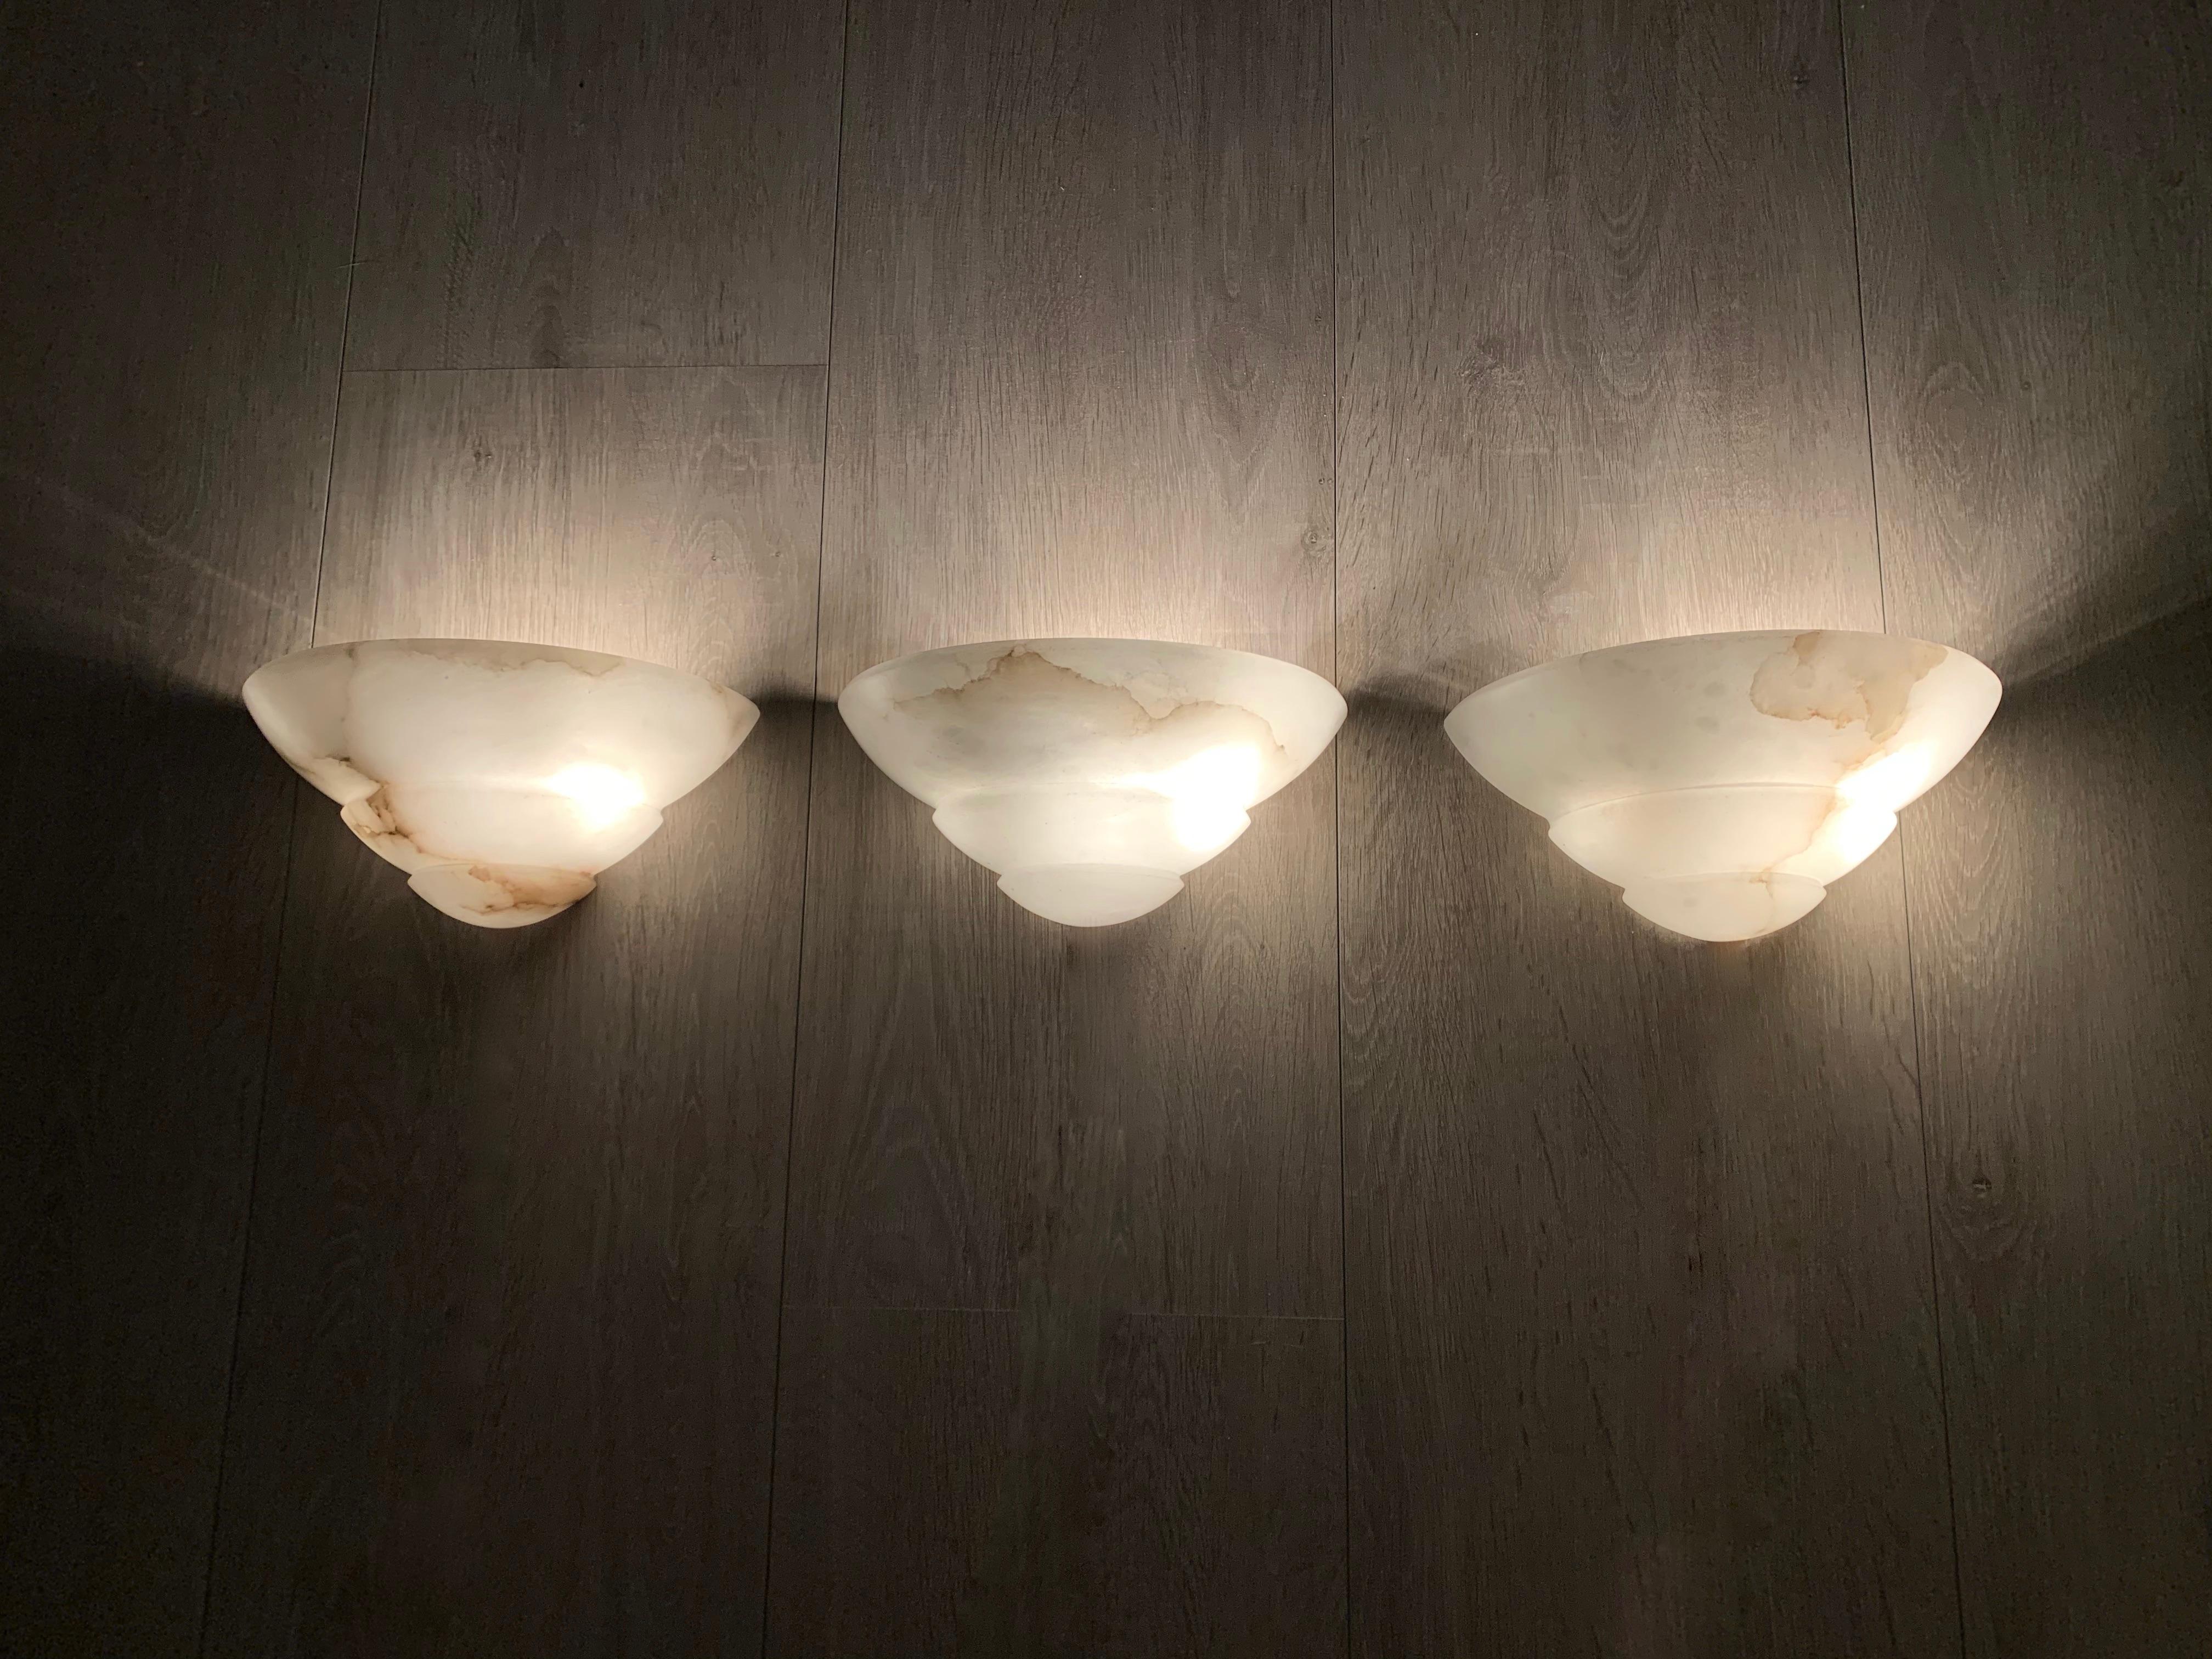 European Timeless Set of Three Art Deco Style Alabaster Wall Sconces Lamps / Lights